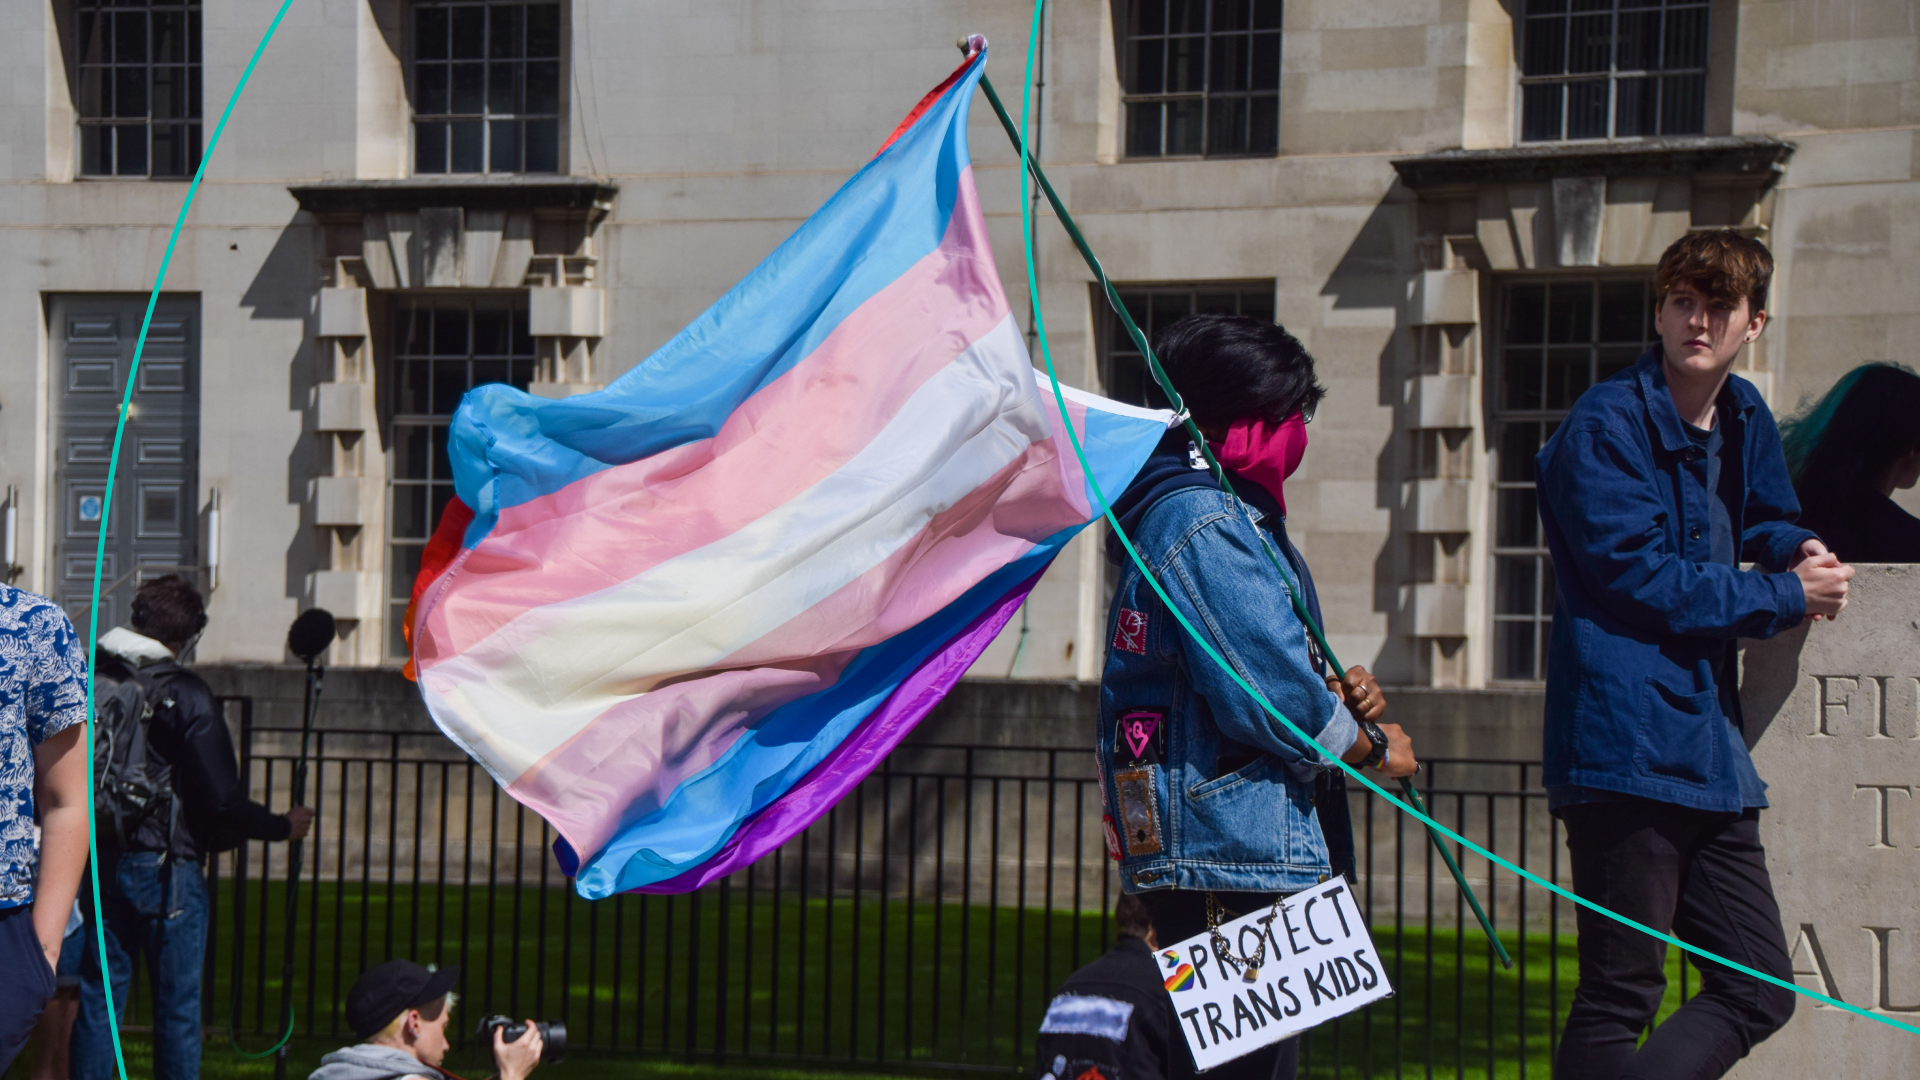 A protester holds a Trans Pride flag and a 'Protect Trans Kids' placard during the trans rights demonstration